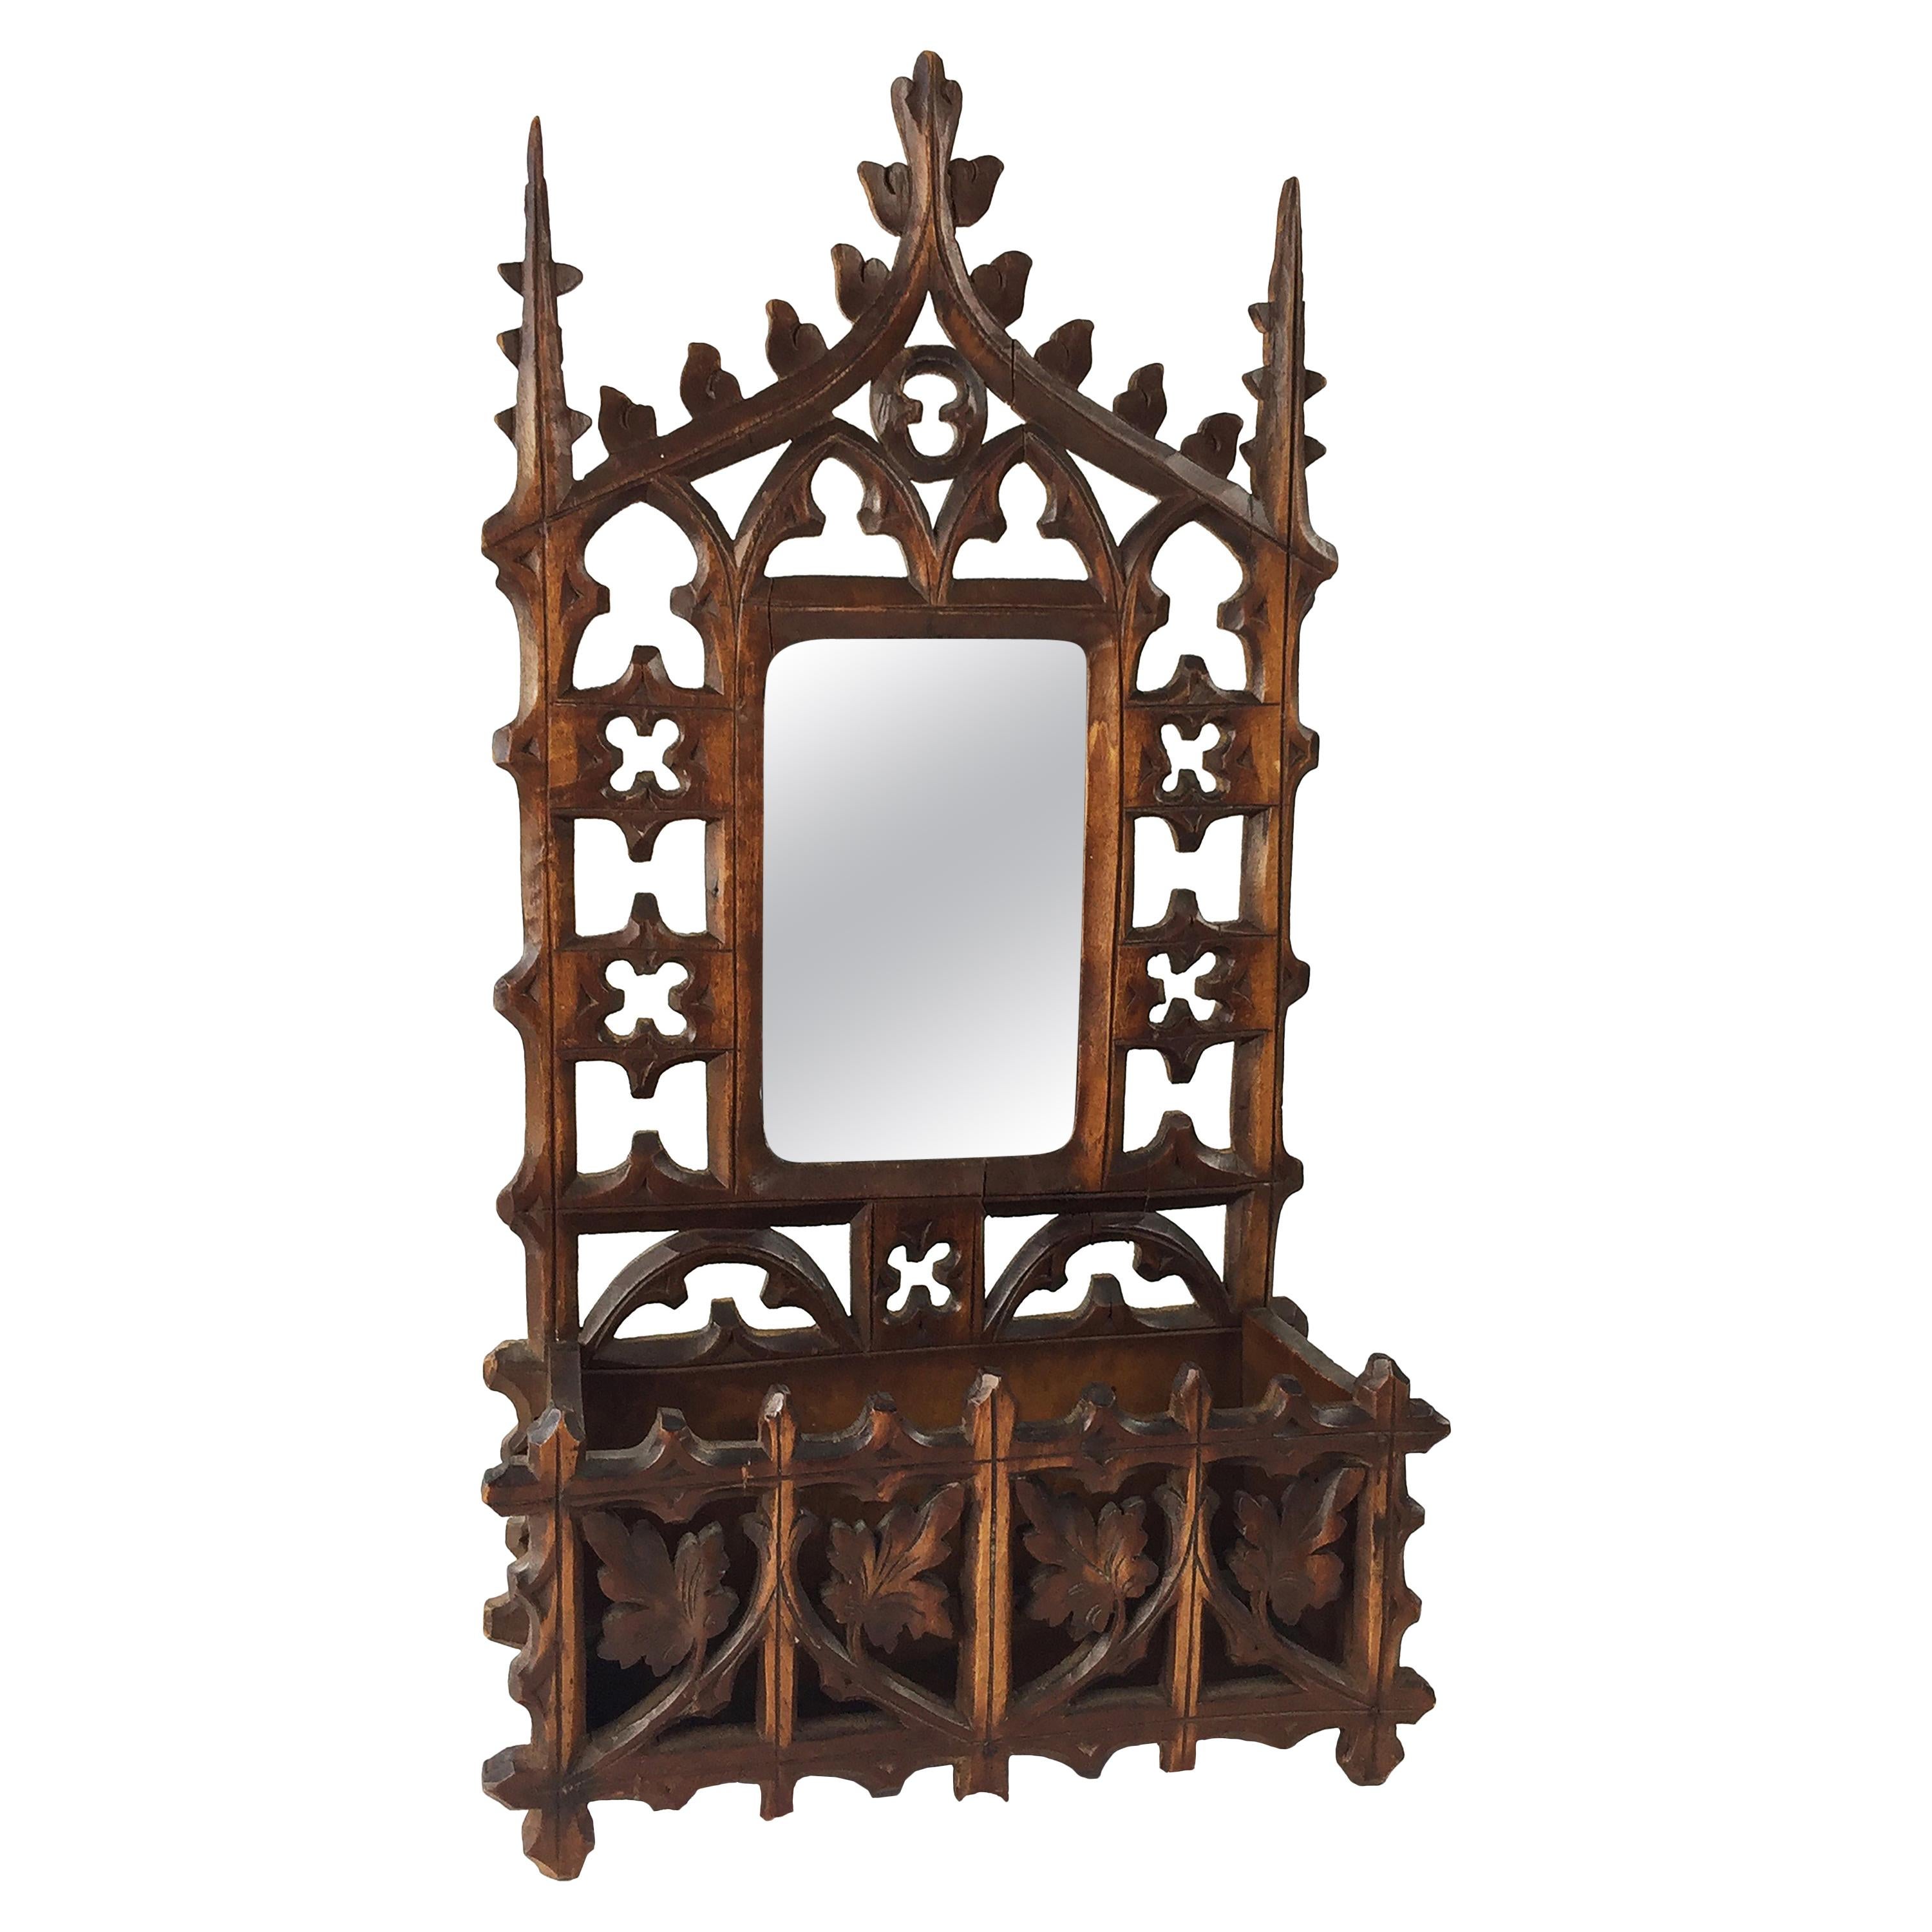 Carved Gothic Wooden Fretwork Letter Rack with Mirror. For Sale